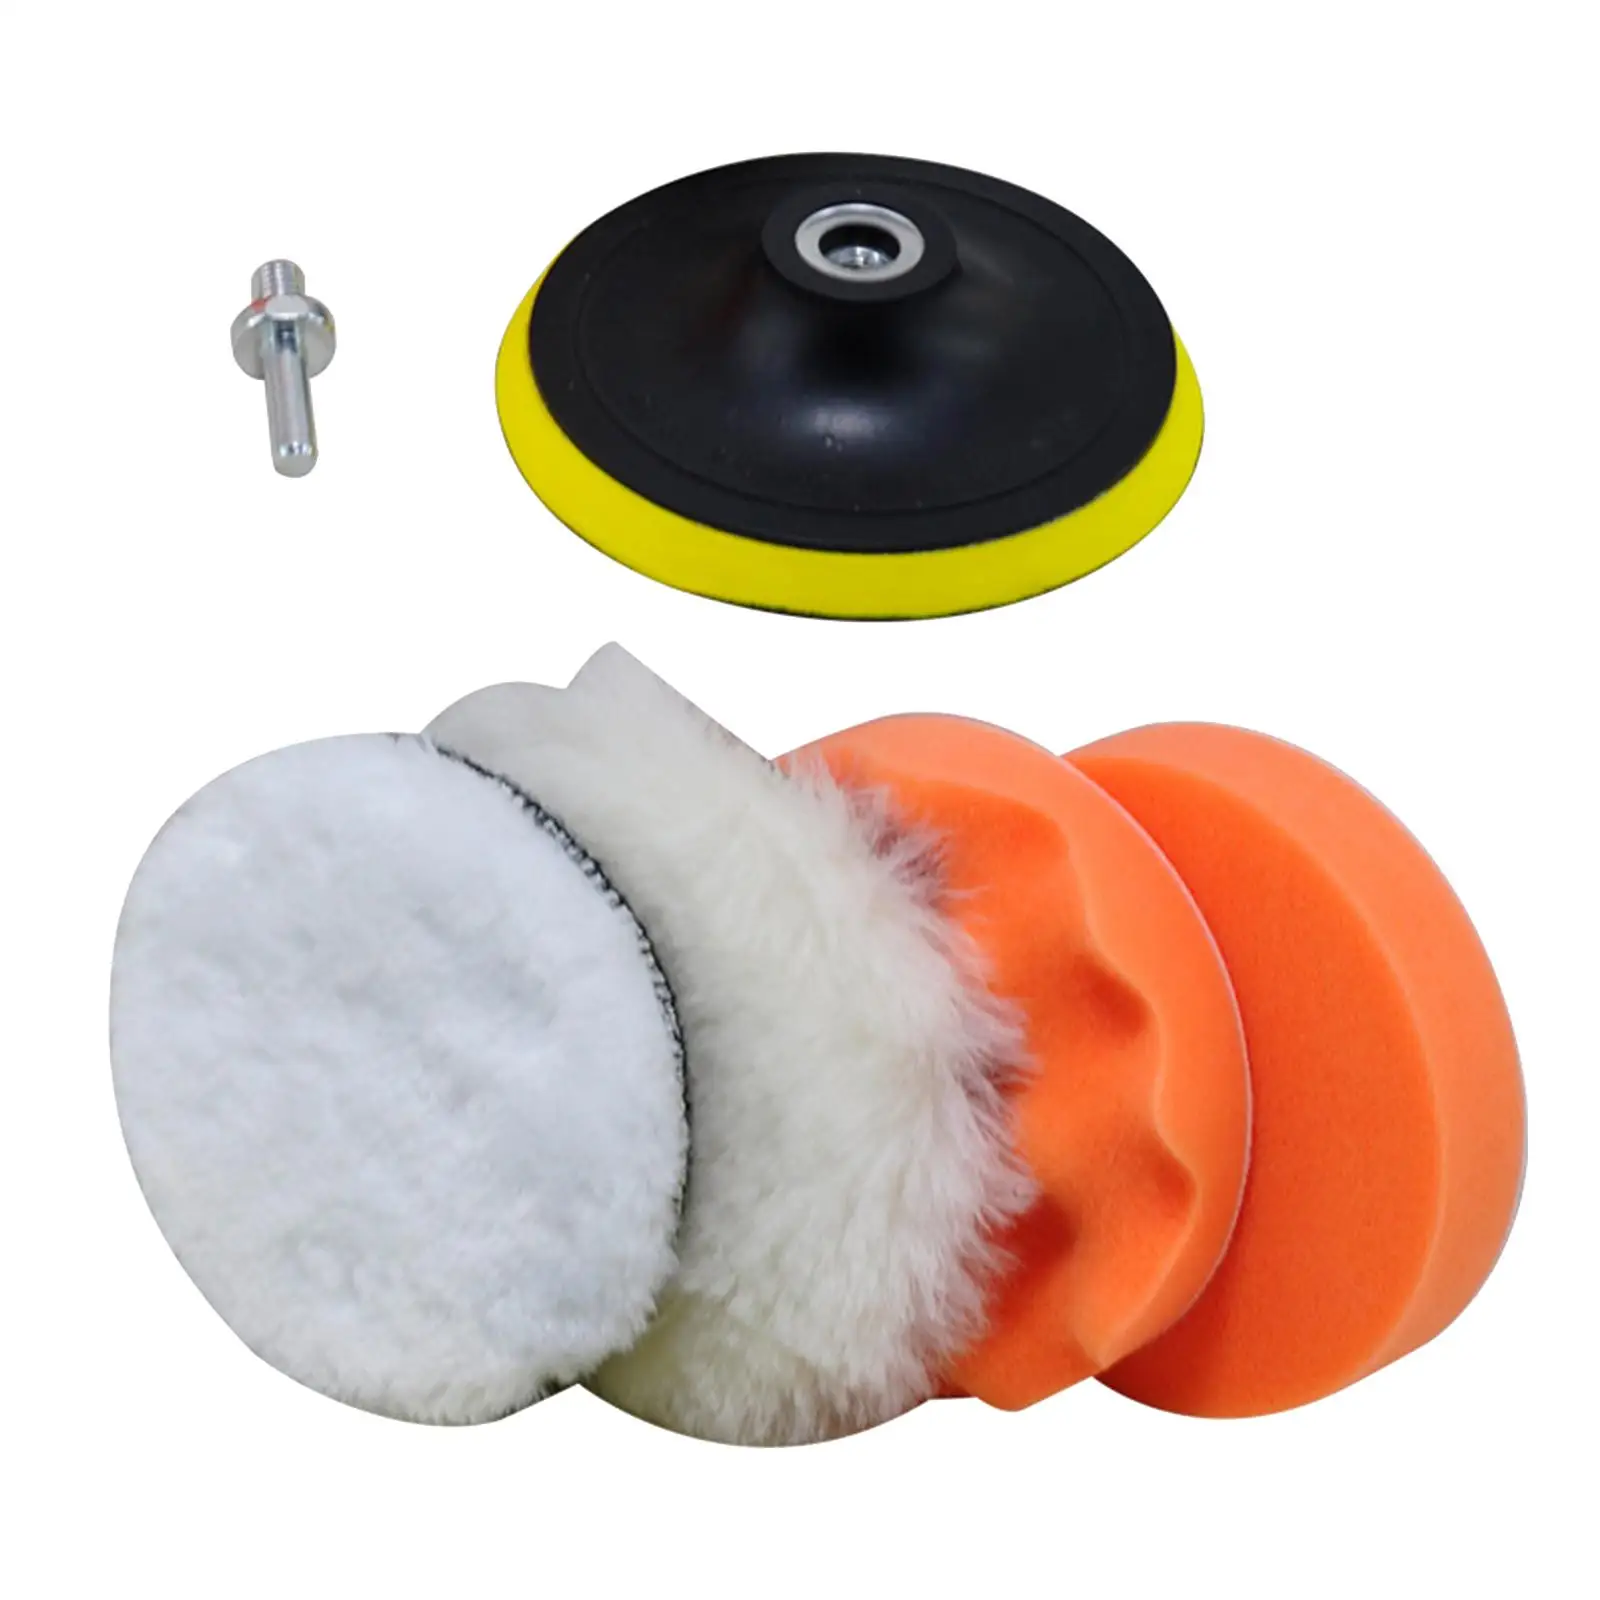 6 Pieces Car Buffing Polishing Pads with Drill Adapter Waxing Buffing Sponge Car Polisher Pad for Polishing Vehicles Waxing